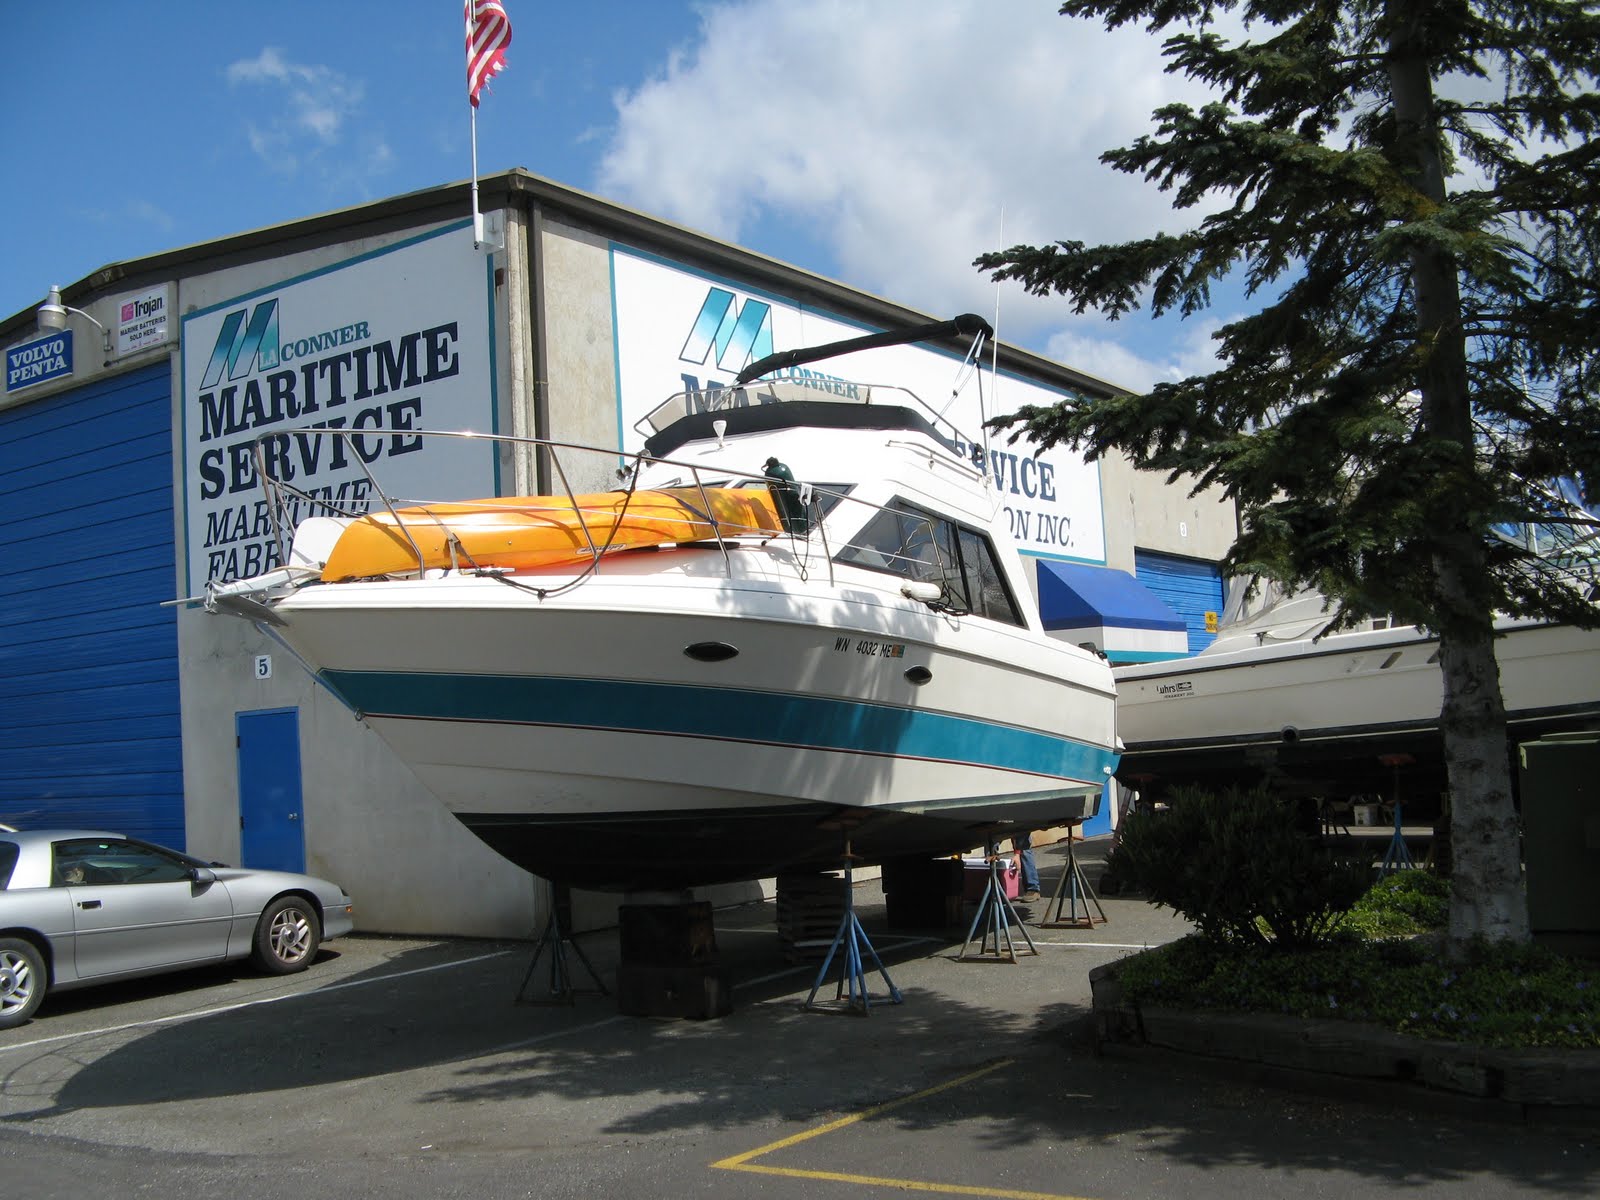 Vancouver Craigslist Boats [How To & DIY Building Plans ...